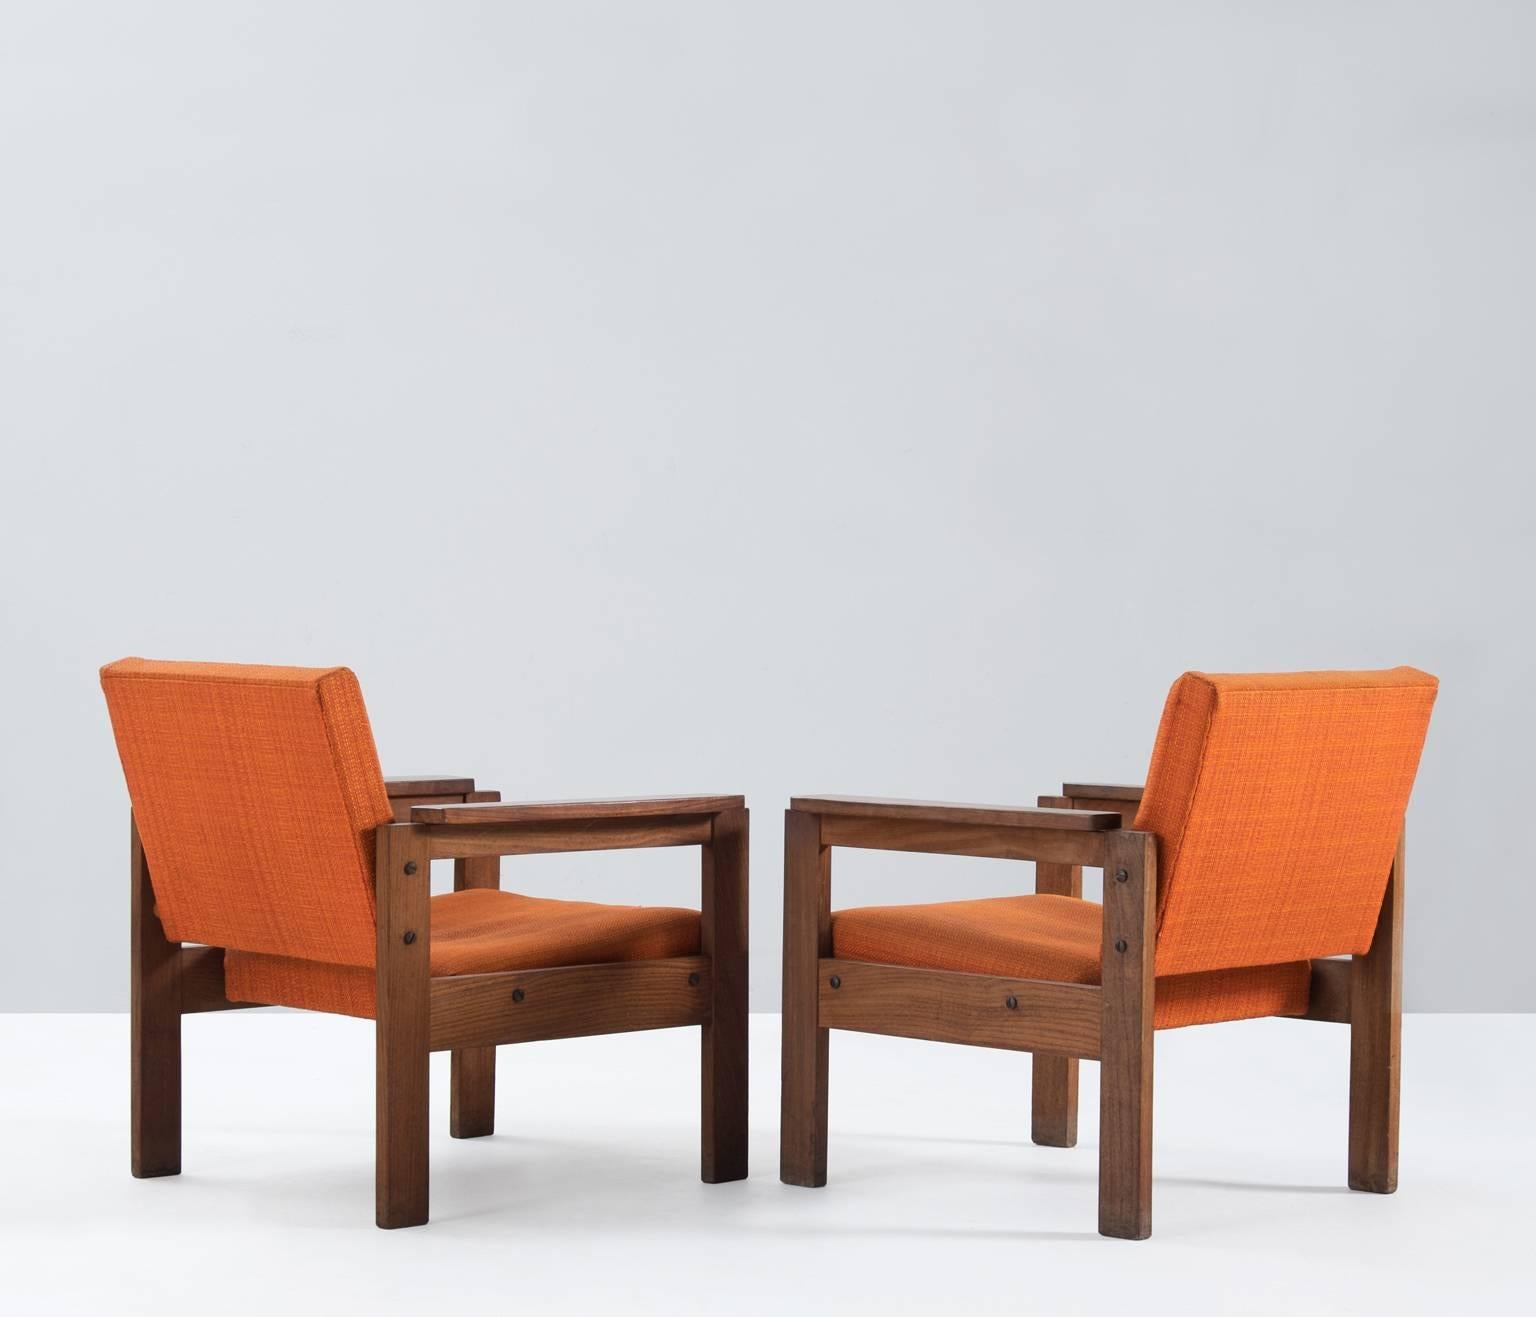 Pair of armchairs, in mahogany and fabric, France, 1950s.

These simplistic designed chairs have an interesting frame with straight lines and a sincere construction. The solid mahogany frame is sturdy and well made. Due their construction and